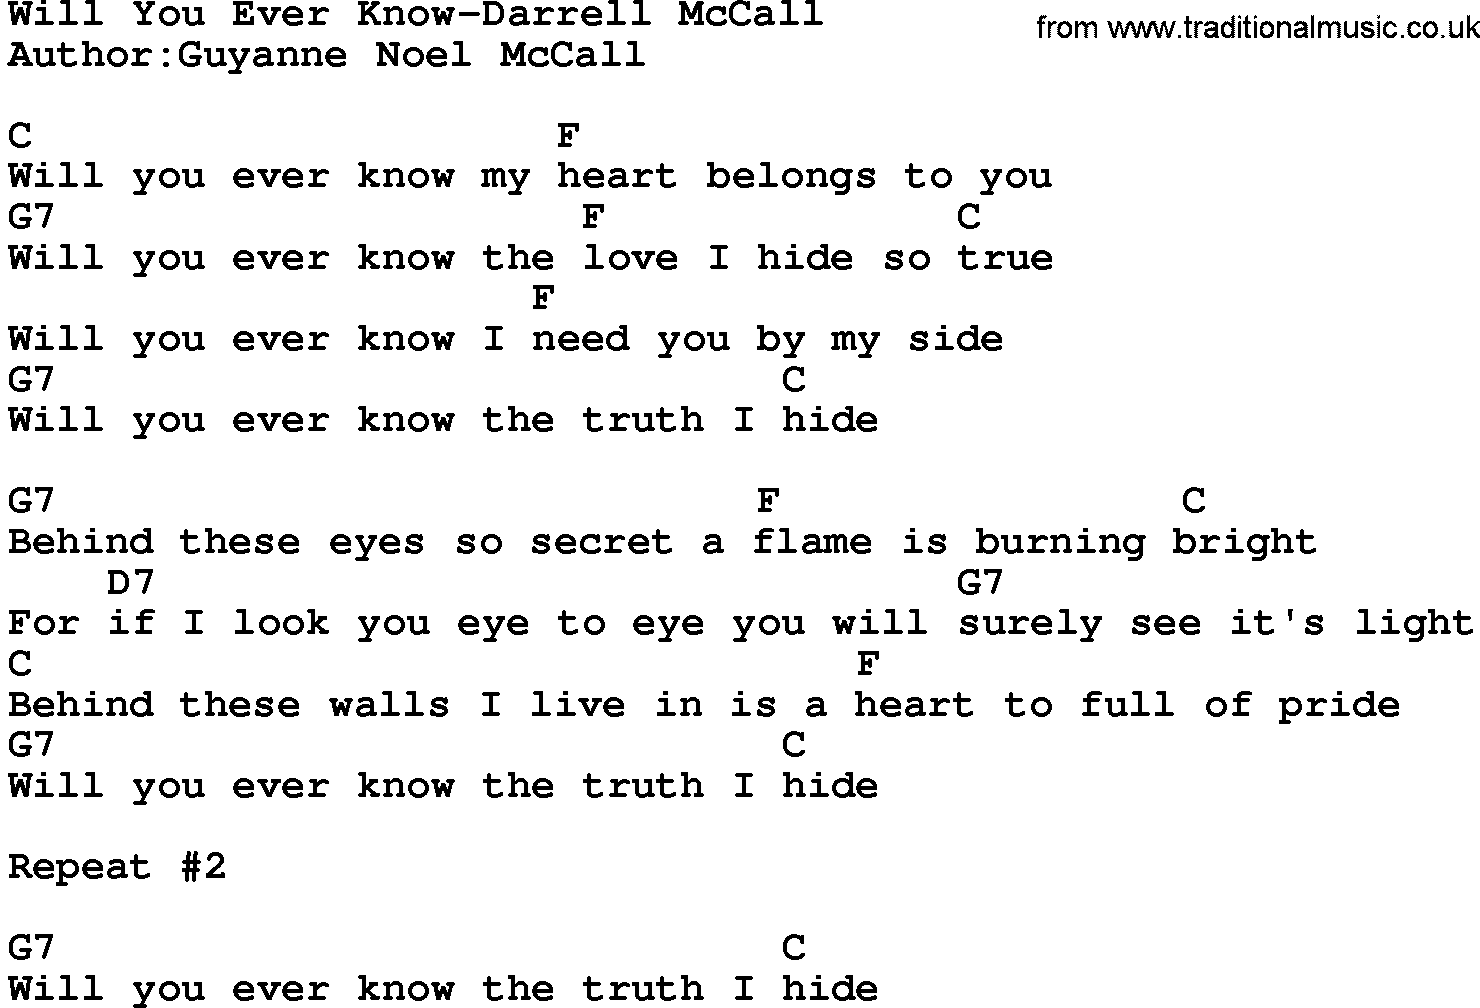 Country music song: Will You Ever Know-Darrell Mccall lyrics and chords